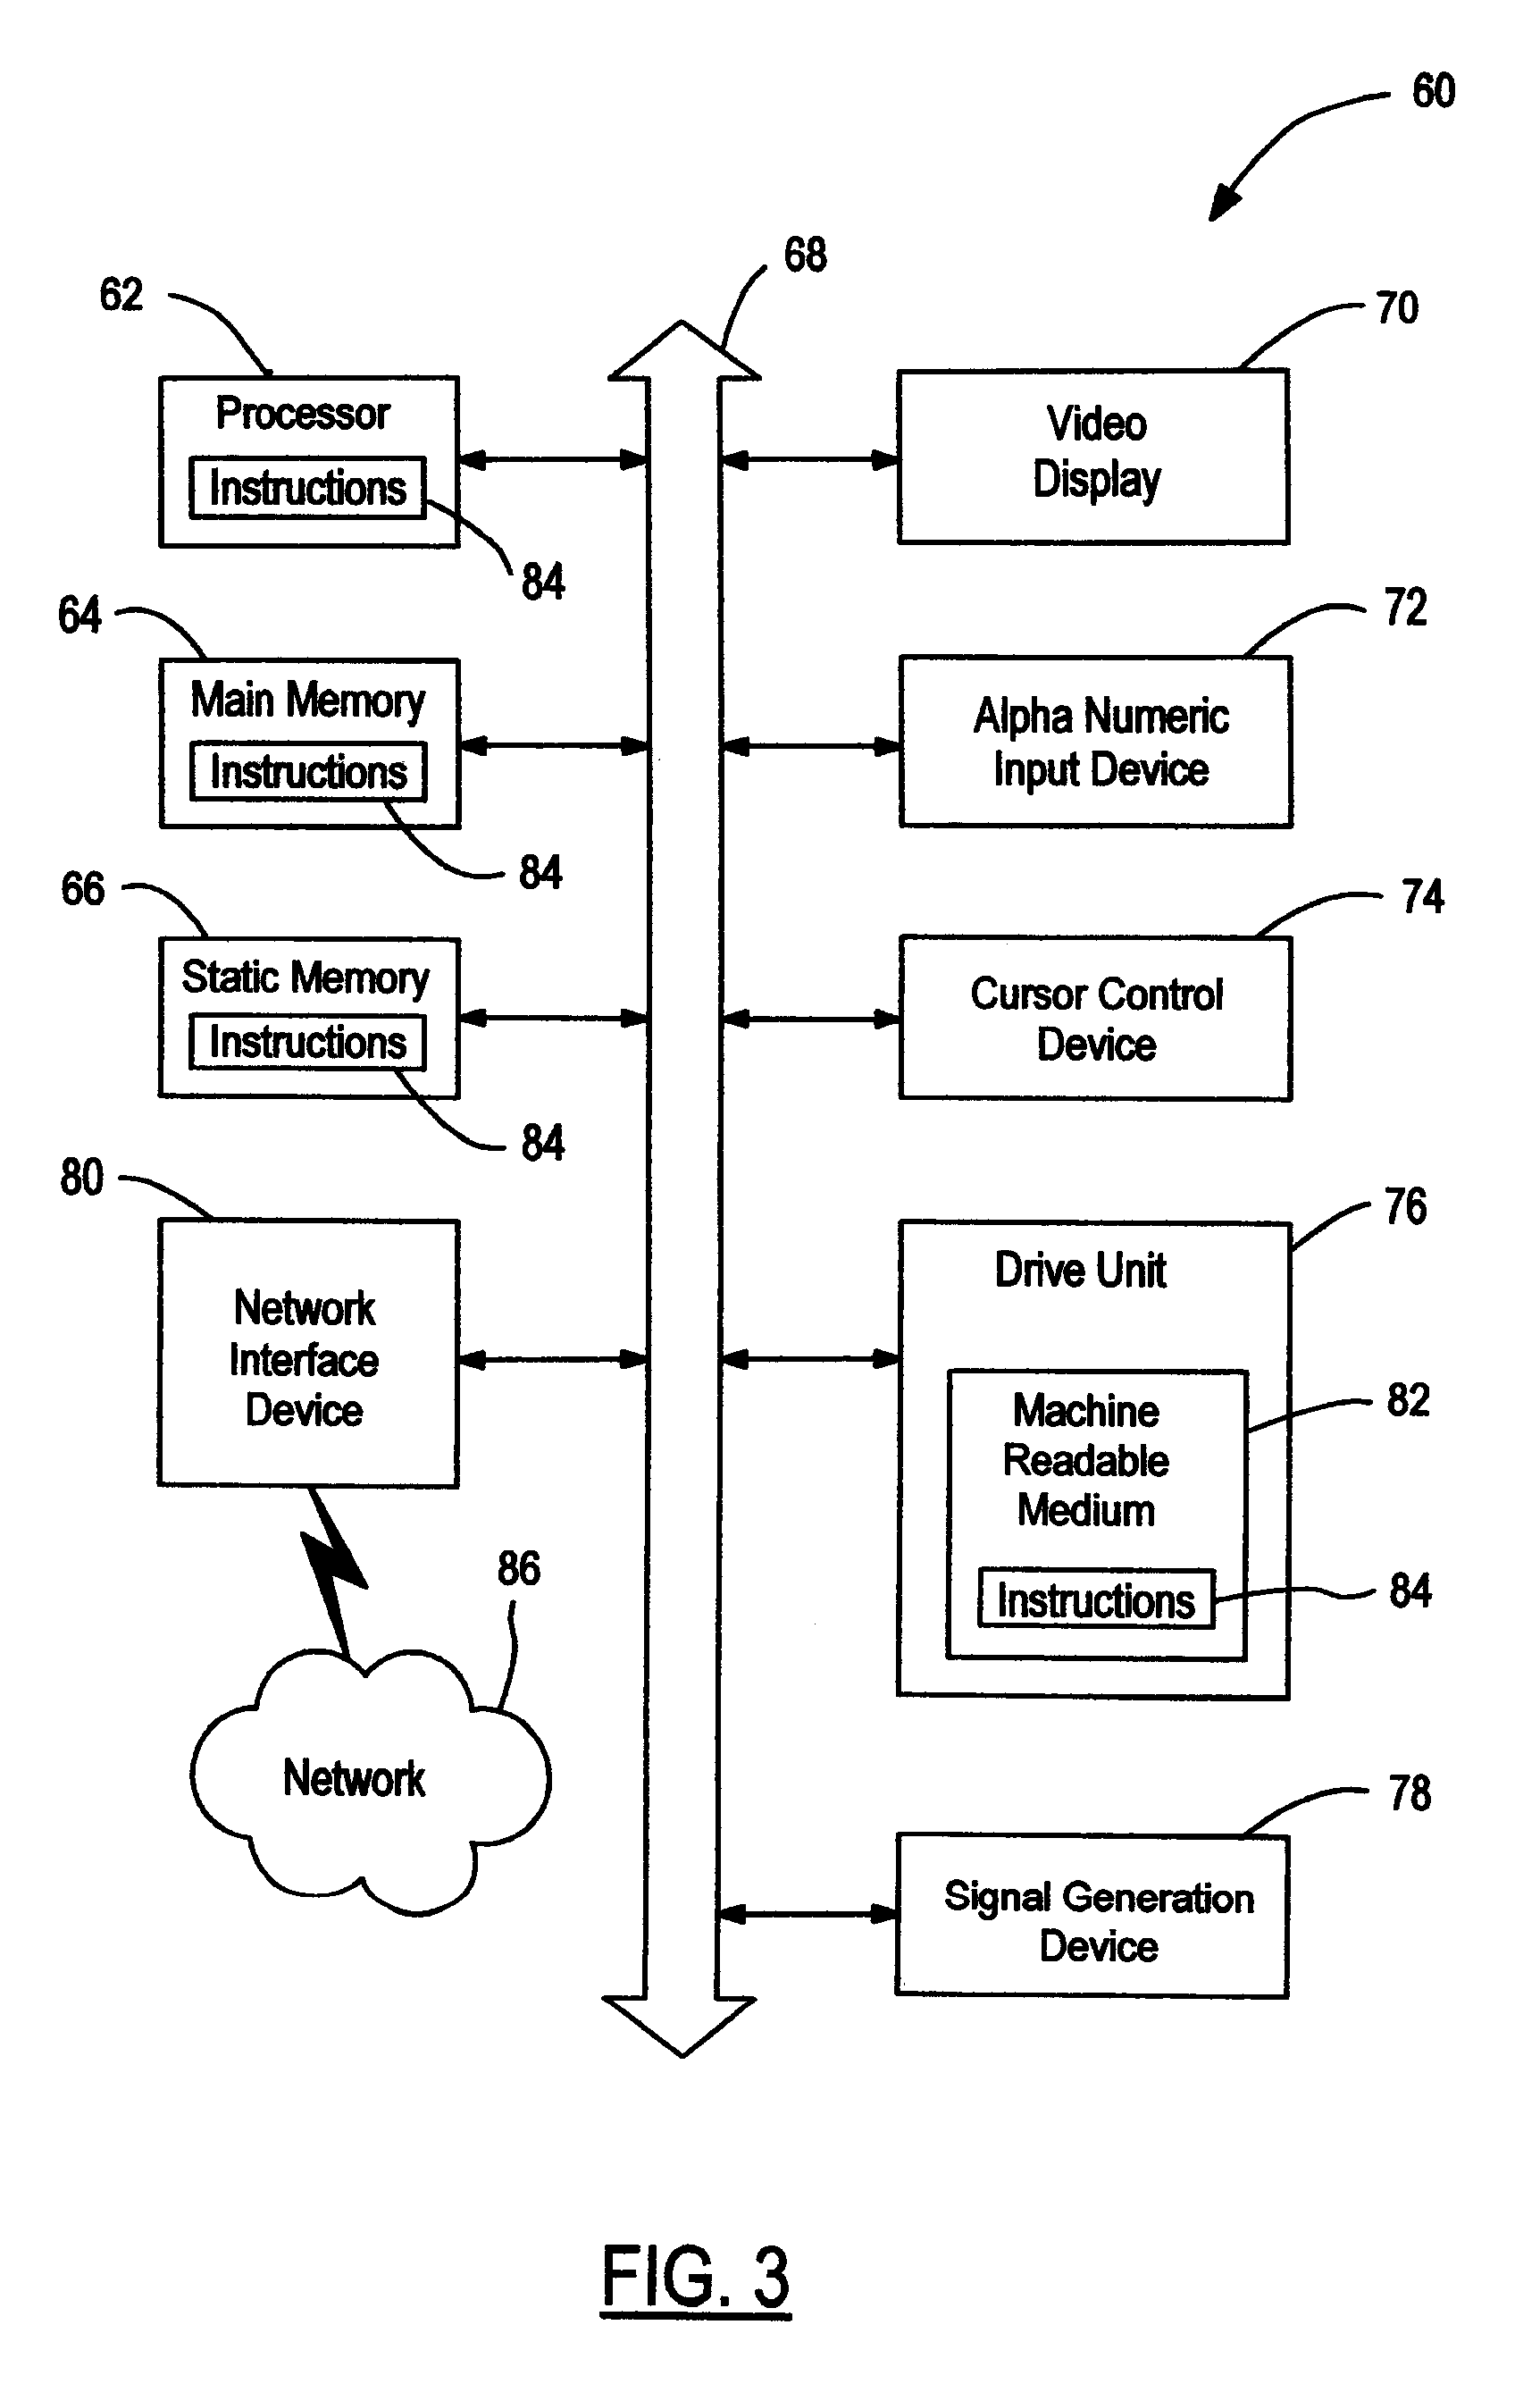 Method of collecting data from network elements